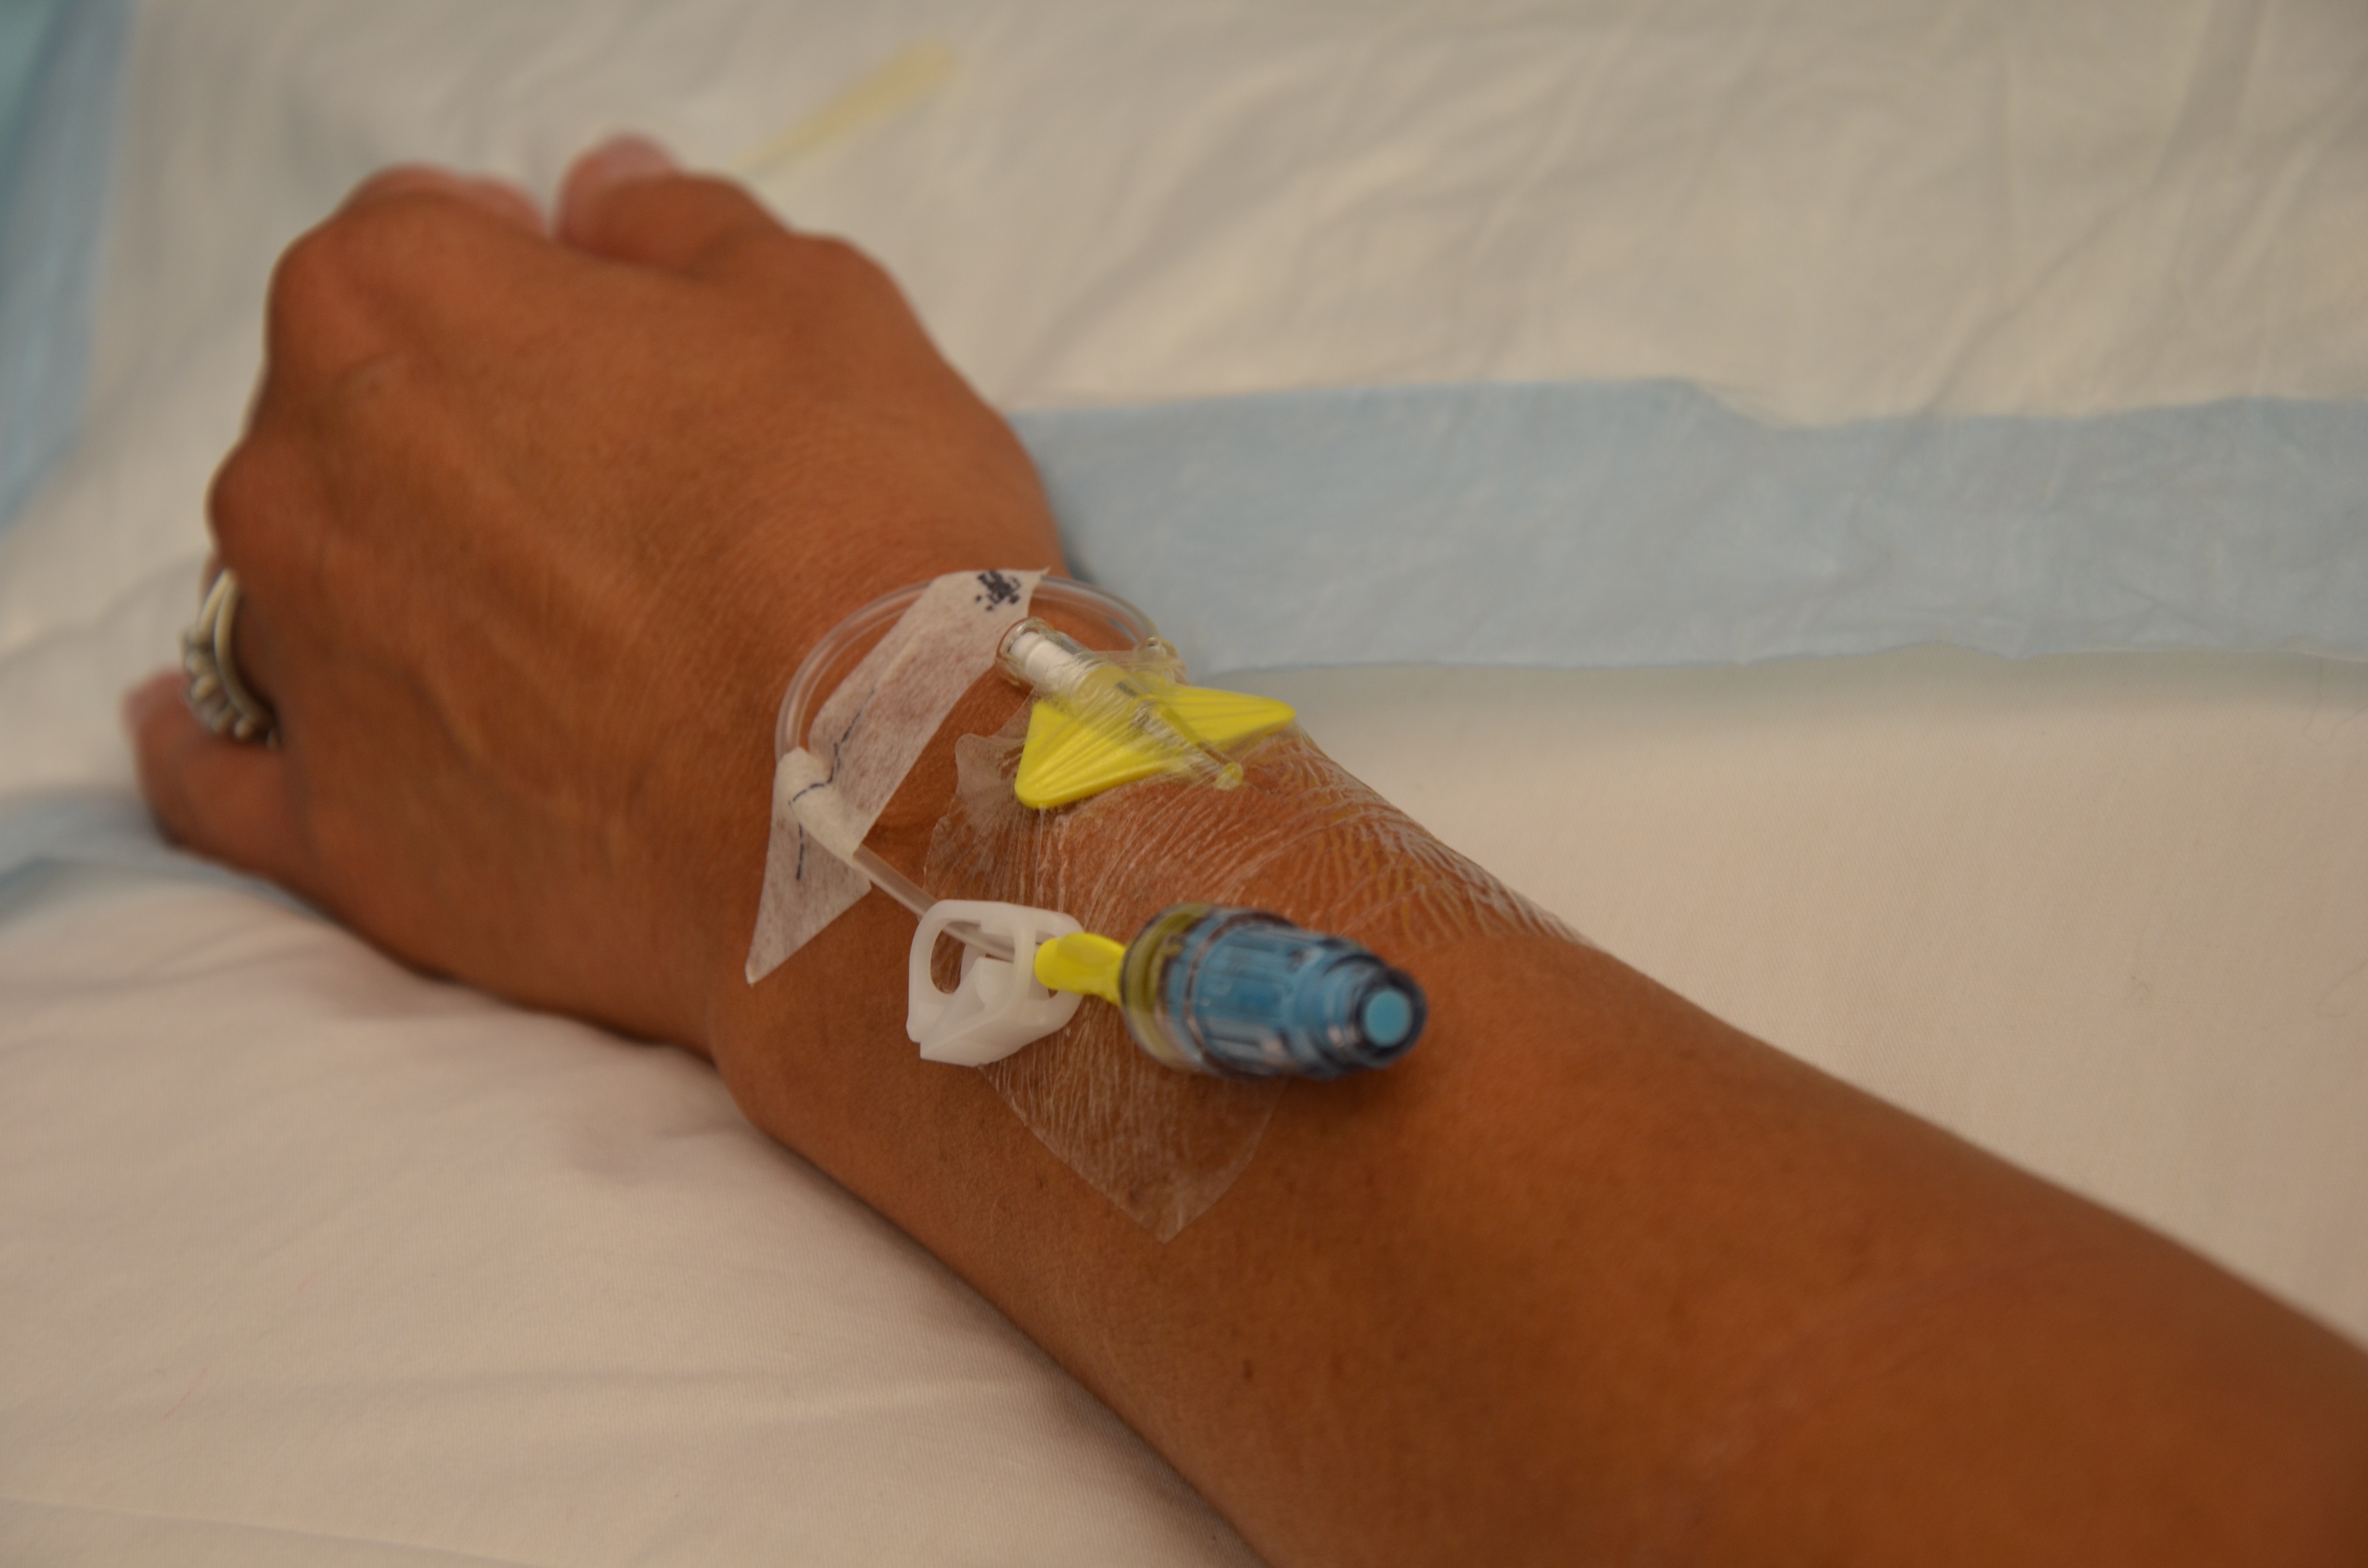 8.3 IV Fluids, IV Tubing, and Assessment of an IV System – Clinical  Procedures for Safer Patient Care